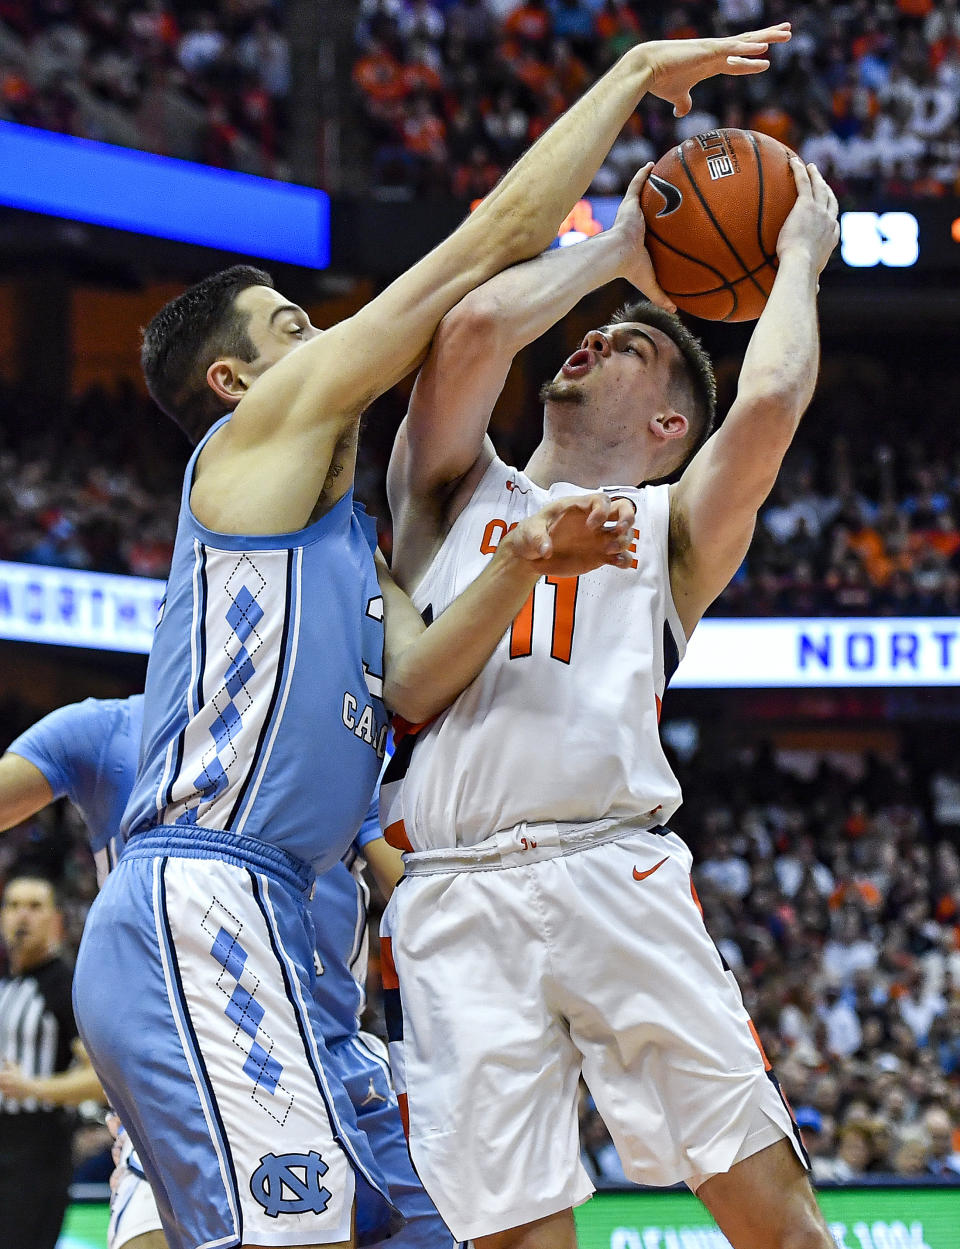 Syracuse guard Joseph Girard III, right, is defended by North Carolina forward Justin Pierce during the second half of an NCAA college basketball game in Syracuse, N.Y., Saturday, Feb. 29, 2020. North Carolina defeated Syracuse 92-79. (AP Photo/Adrian Kraus)